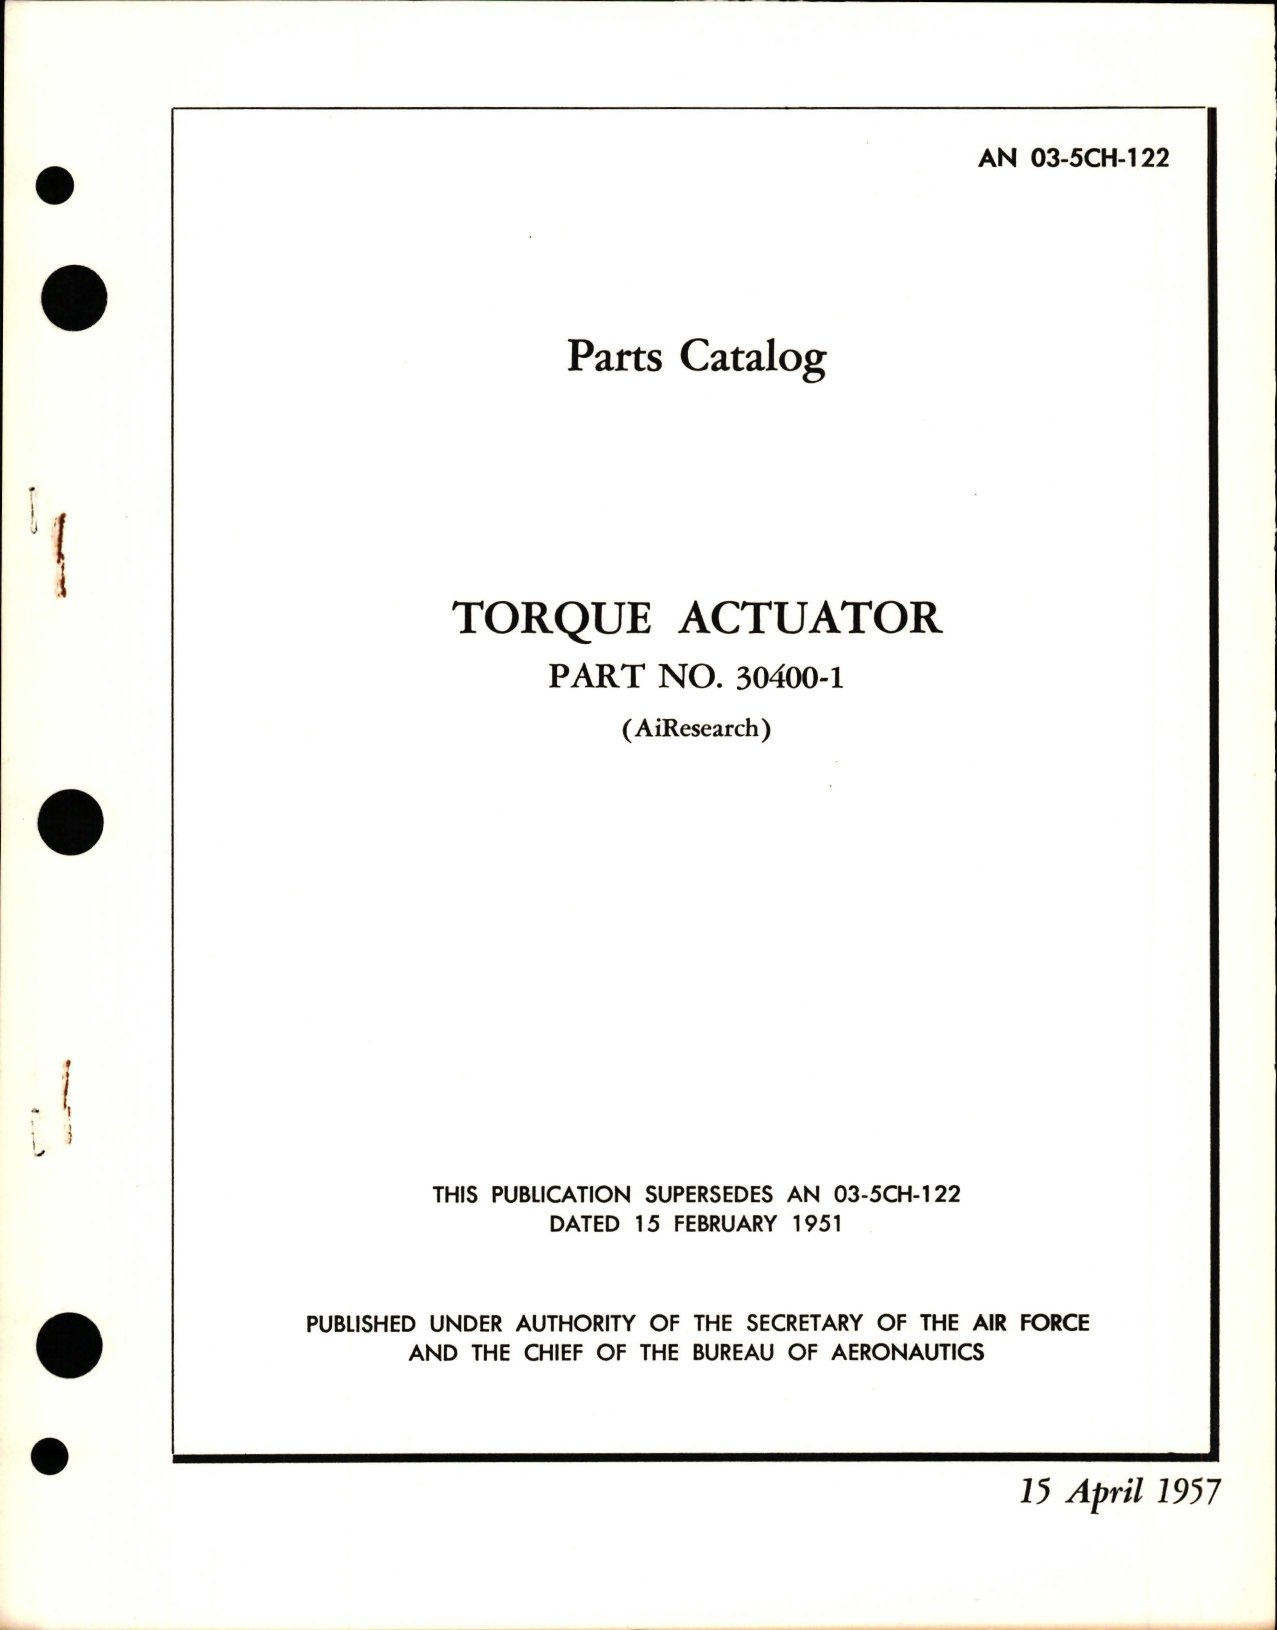 Sample page 1 from AirCorps Library document: Parts Catalog for Torque Actuator - Part 30400-1